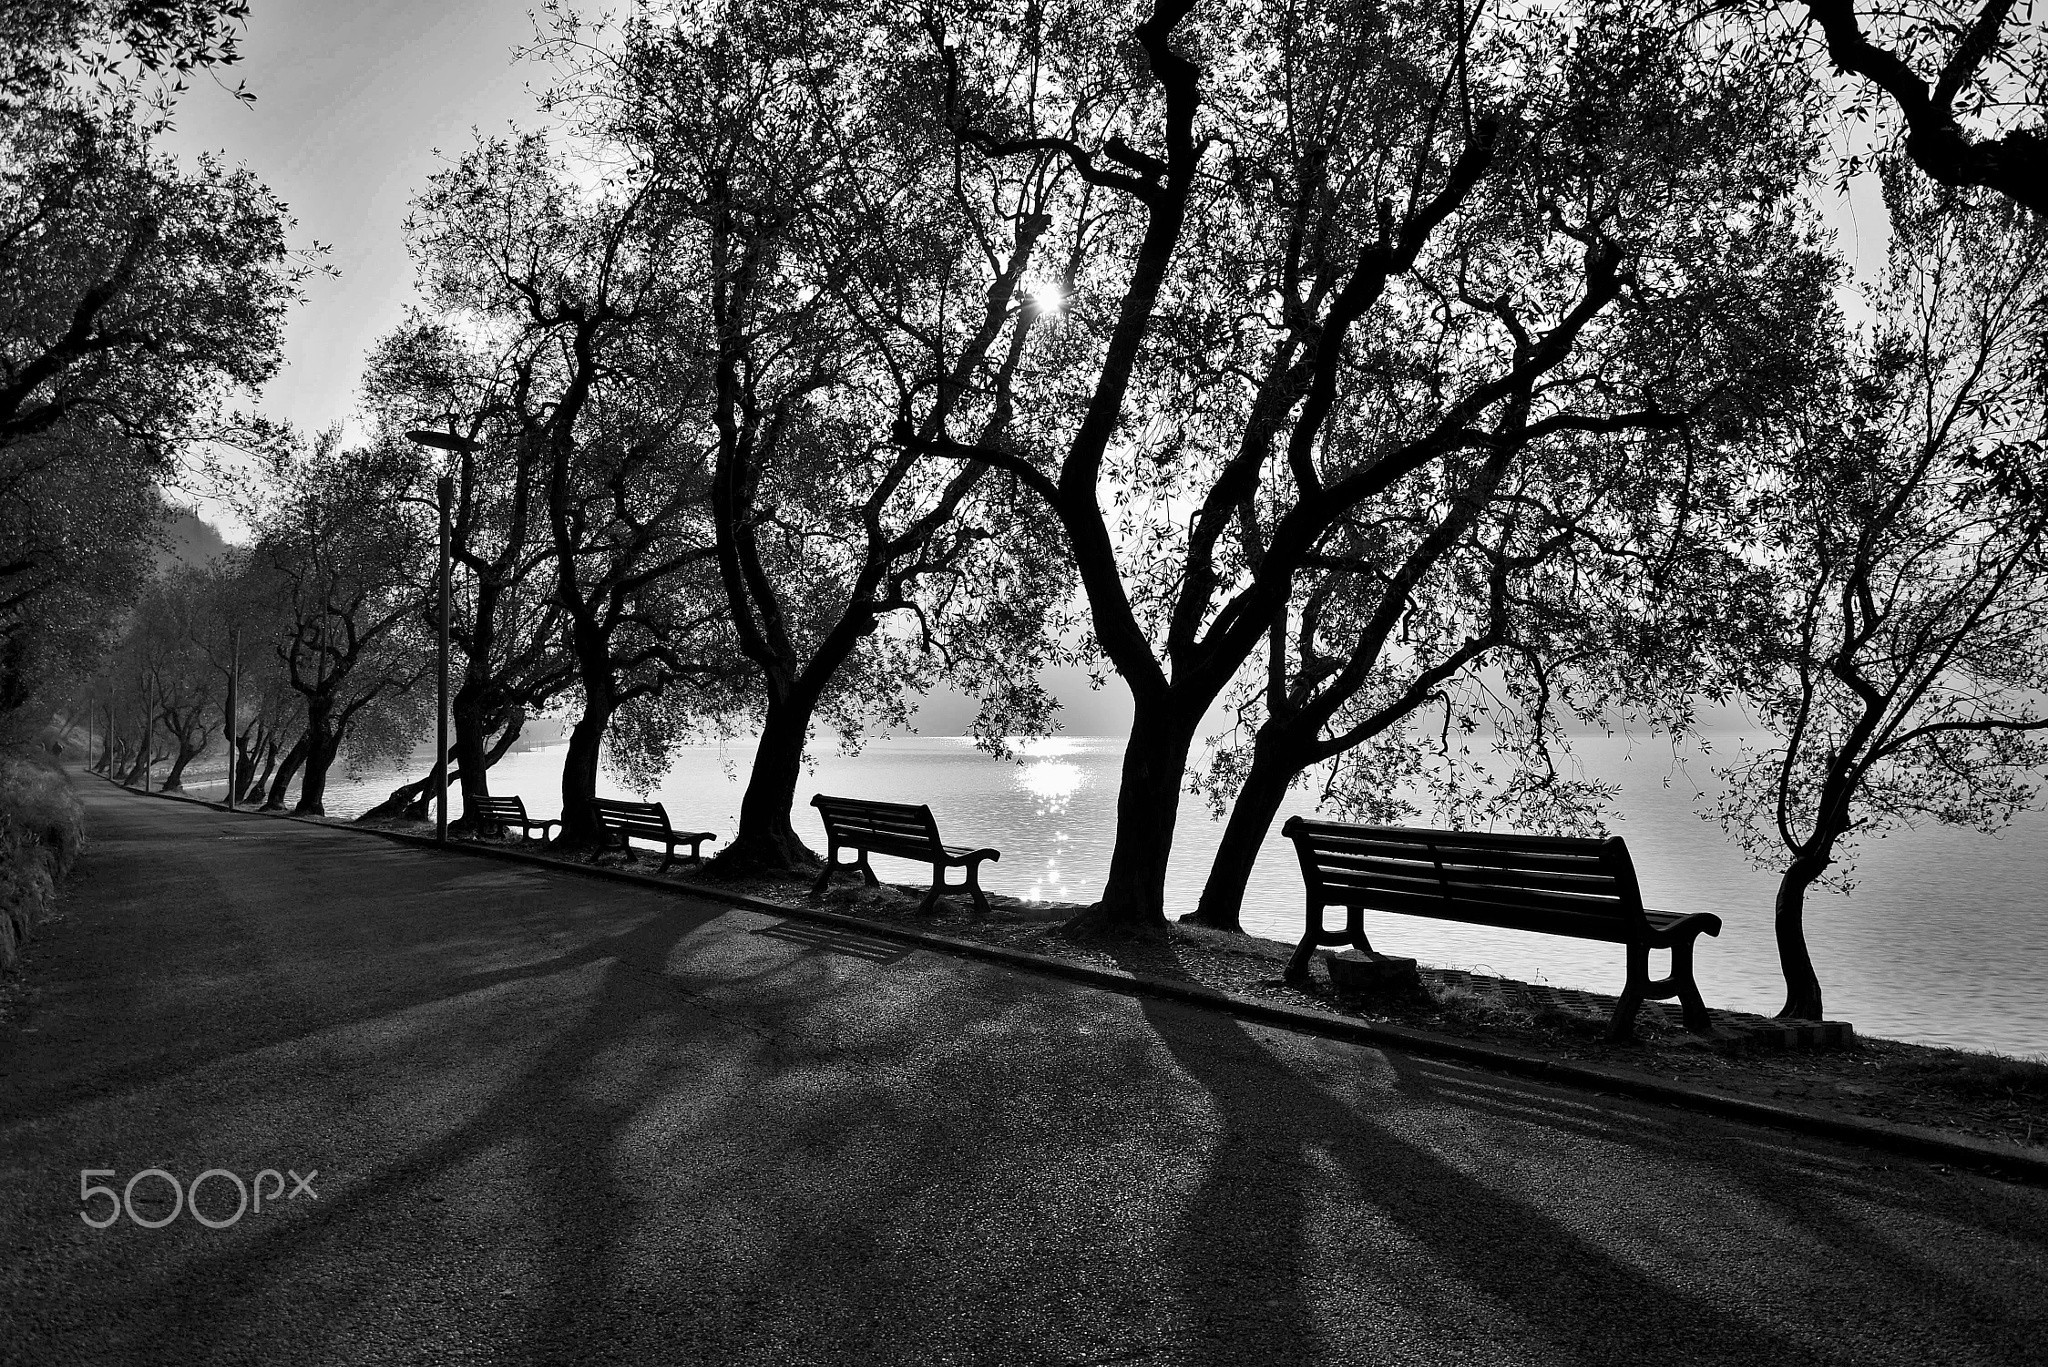 General 2048x1367 monochrome 500px bench outdoors lake watermarked trees